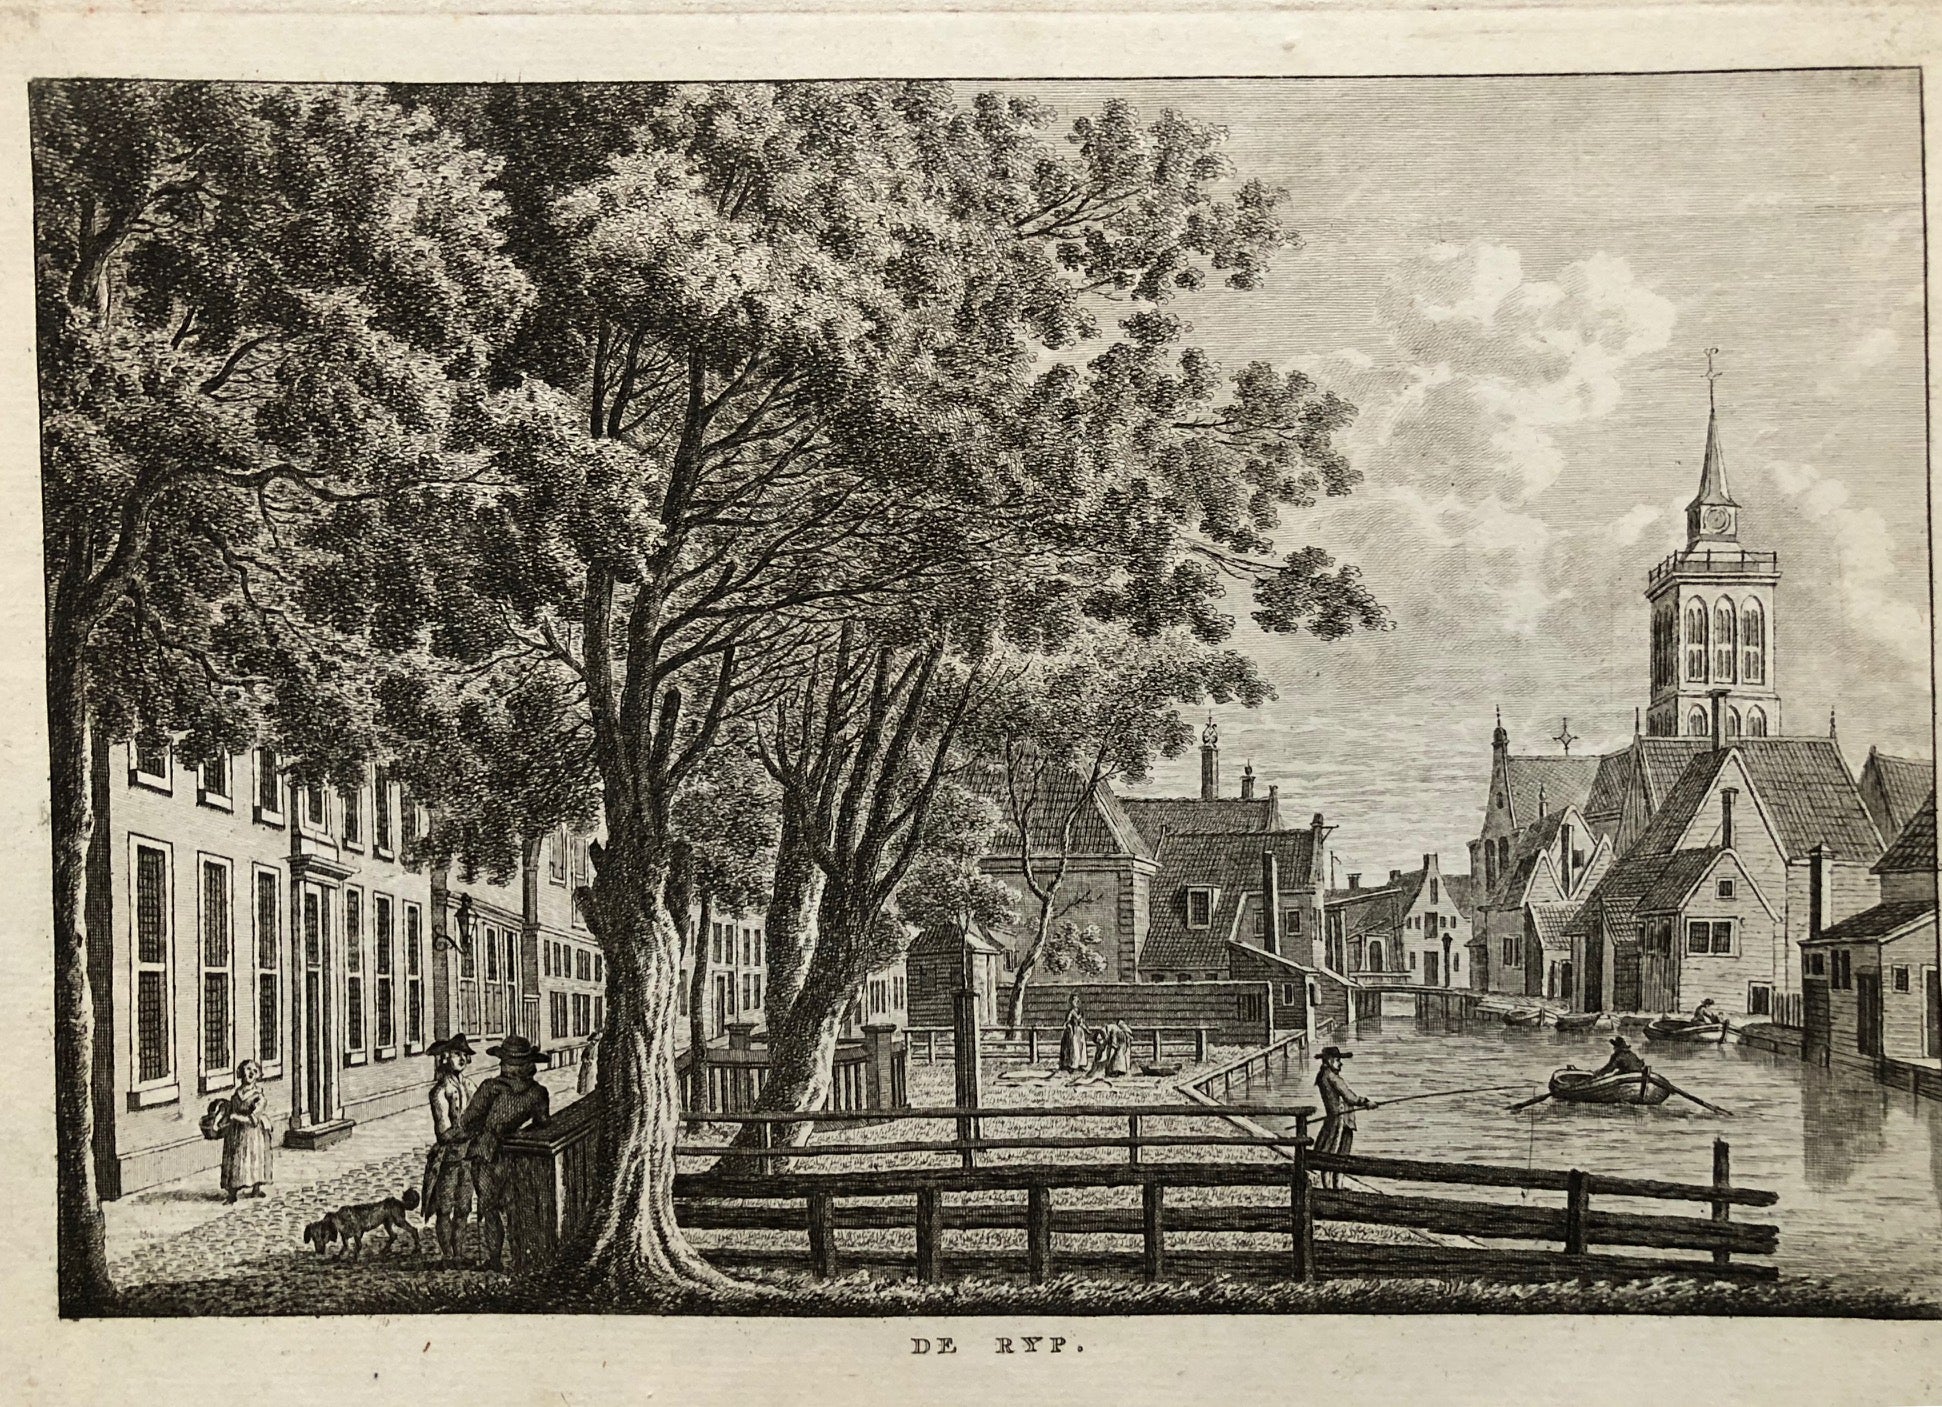 This engraving shows in a very nice way De Rijp in the 18th century. Engraved by Bendorp after Jan Bulthuis in 1763